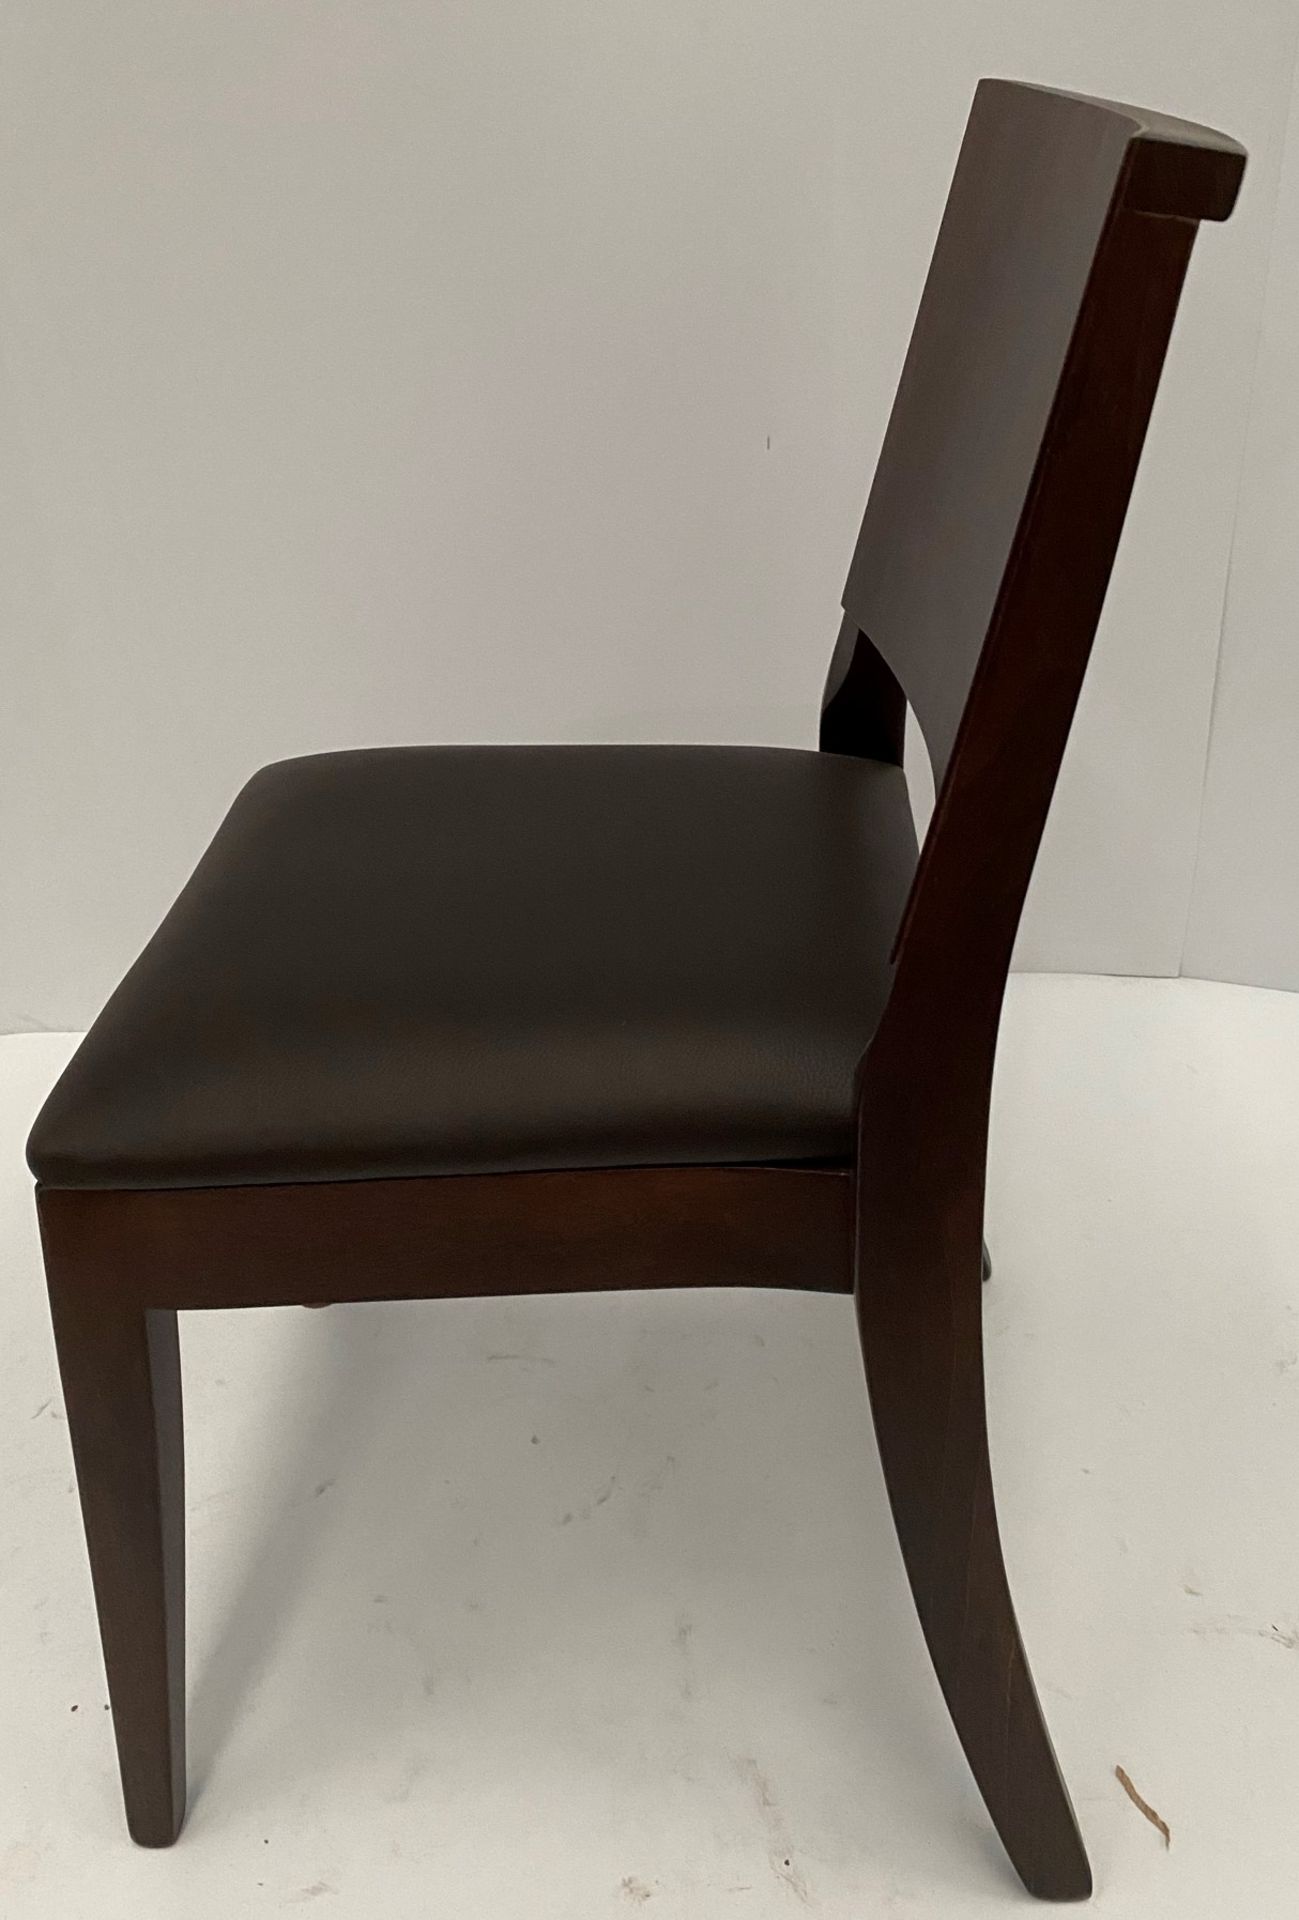 A Reuben Vena BR-5 Dark Brown side/dining chair with upholstered seat and walnut coloured frame - Image 2 of 4